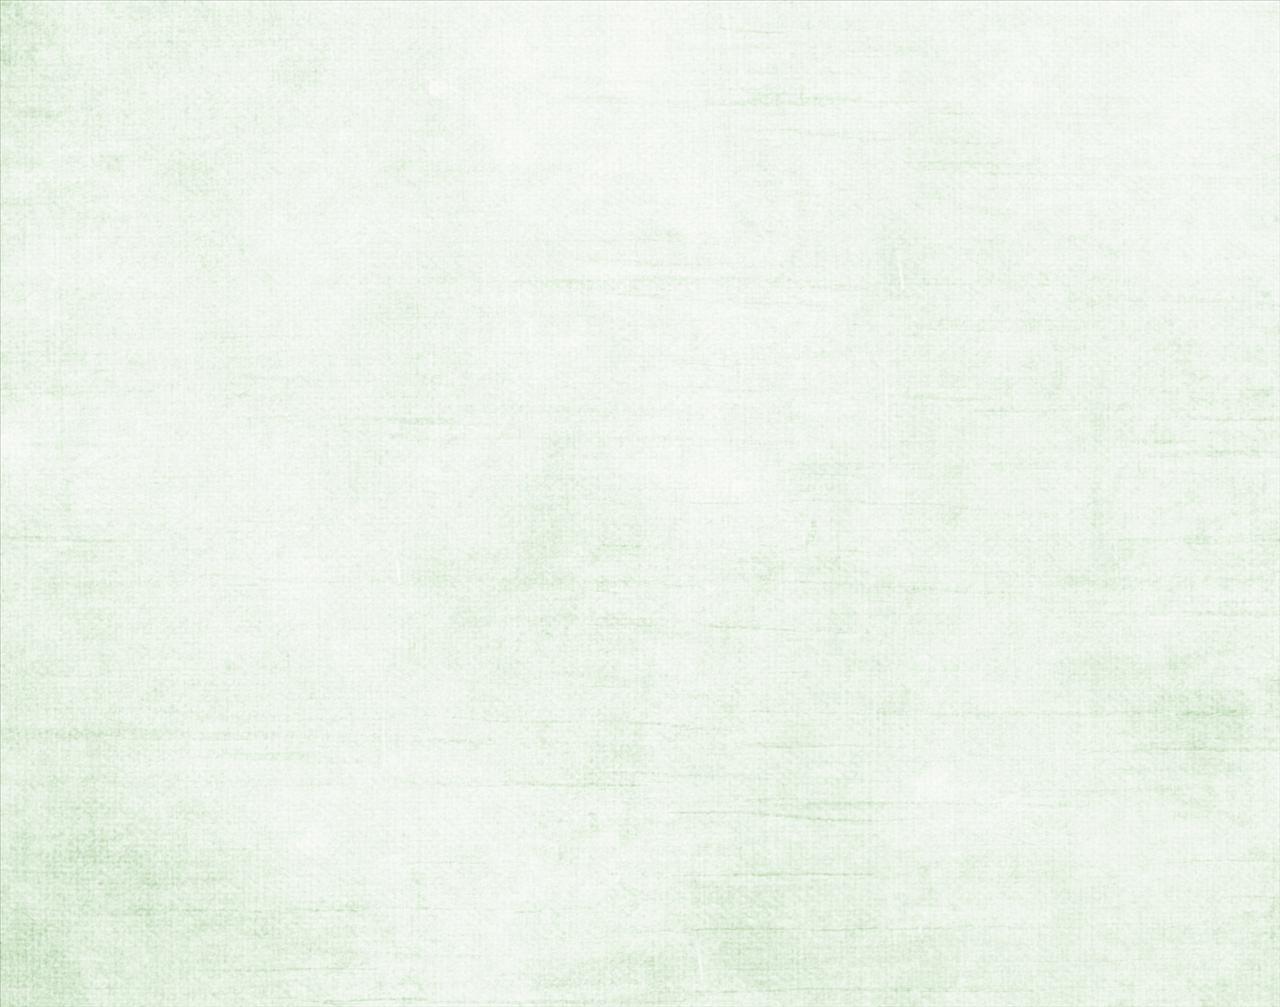 Pale Green Background Images Pictures   Becuo